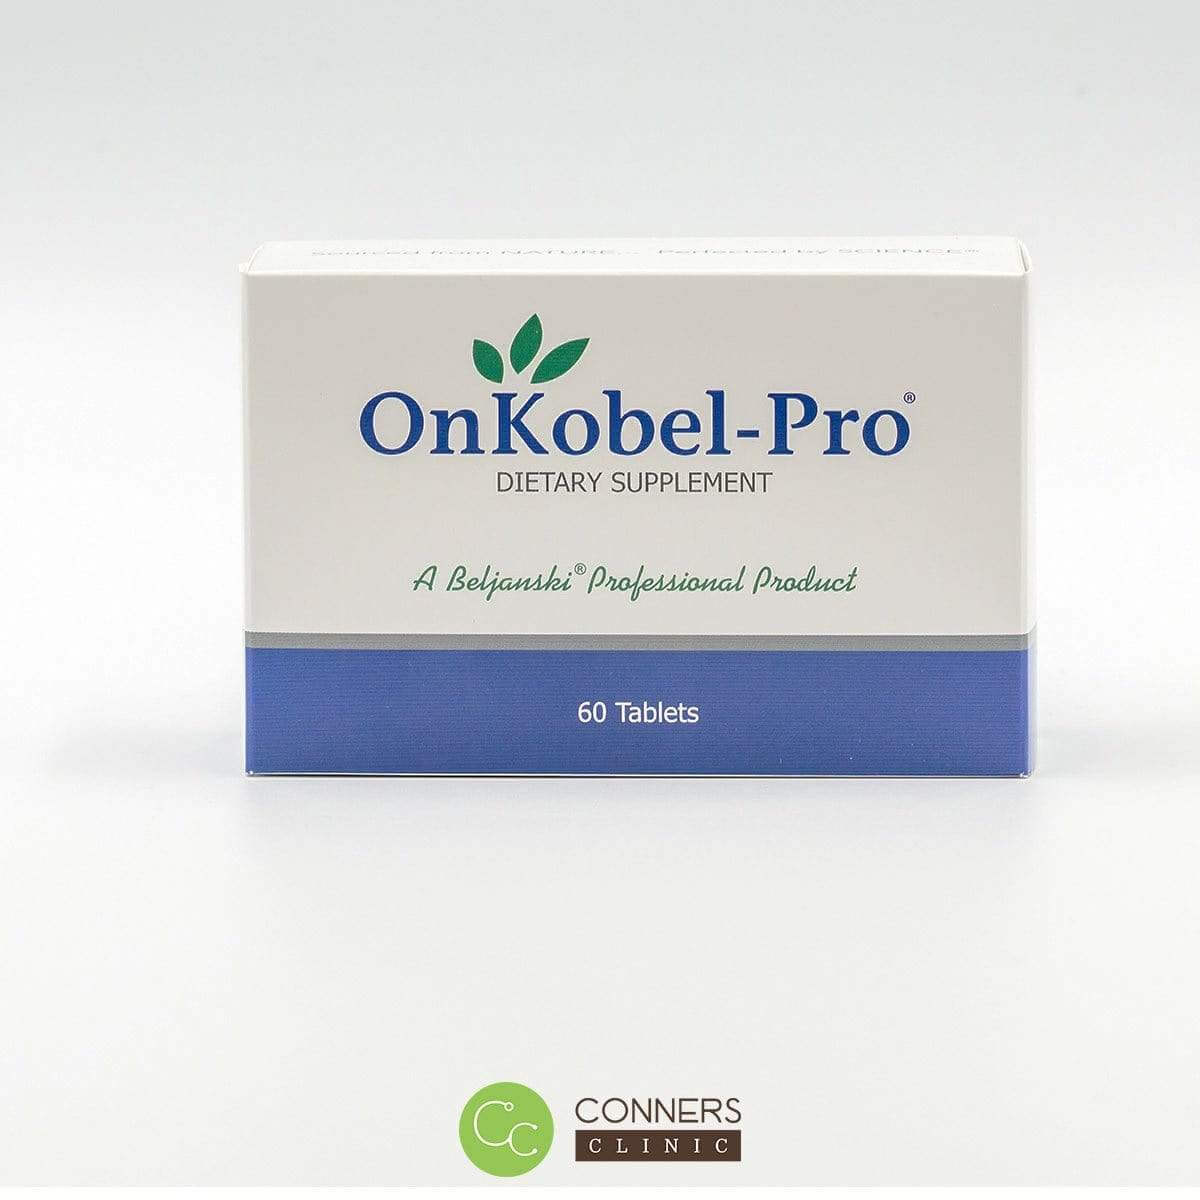 OnKobel-Pro - 60 Capsules Natural-Source International Supplement - Conners Clinic